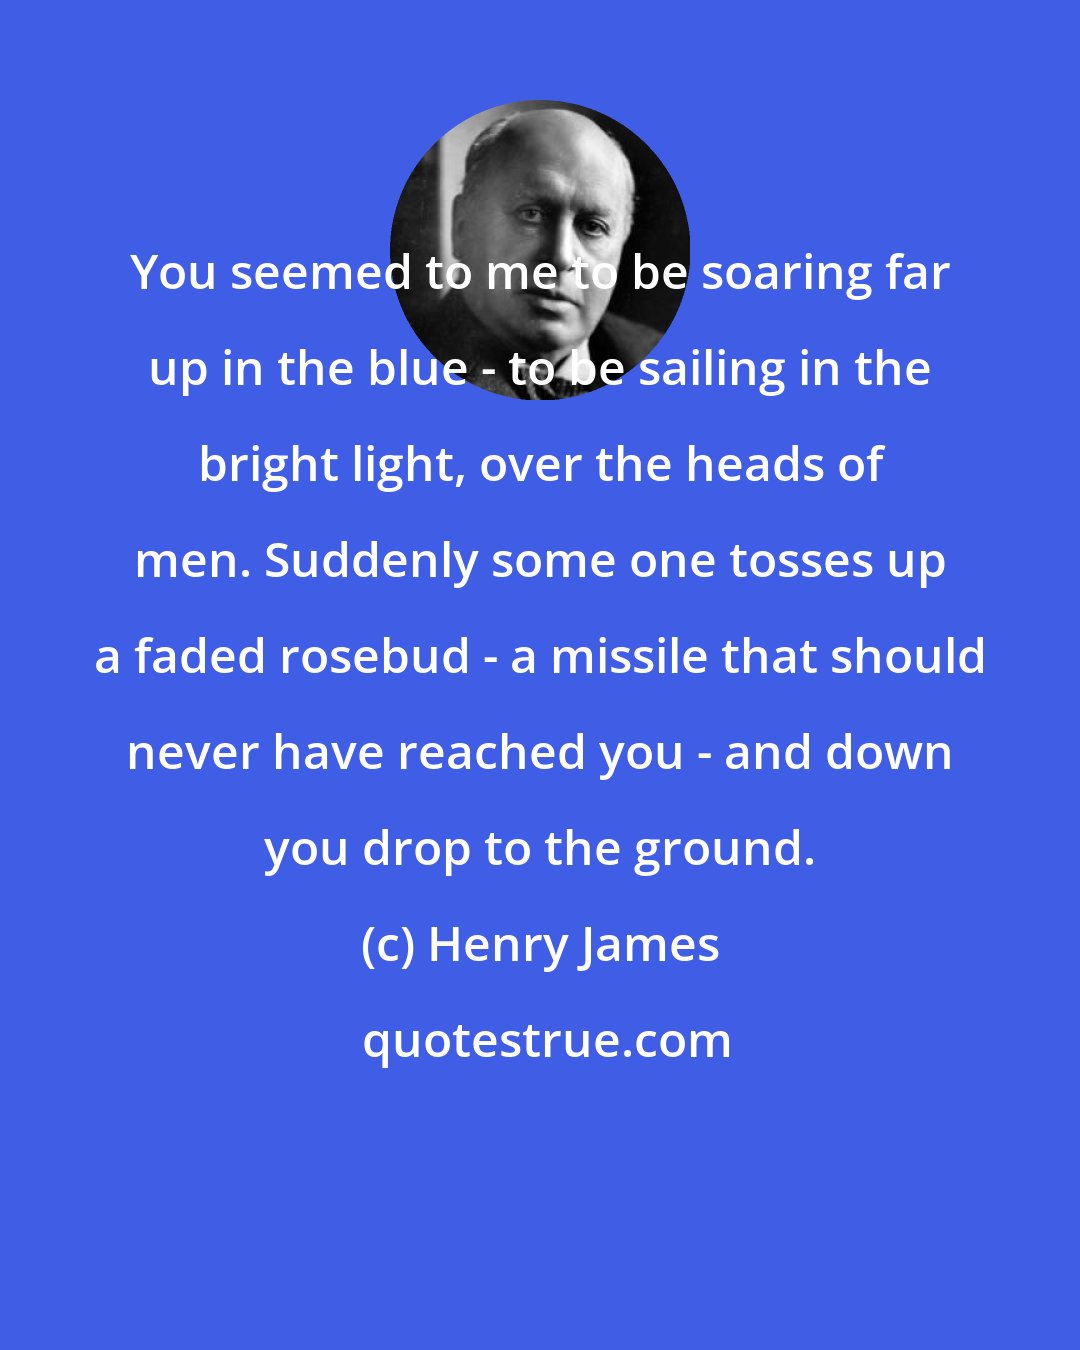 Henry James: You seemed to me to be soaring far up in the blue - to be sailing in the bright light, over the heads of men. Suddenly some one tosses up a faded rosebud - a missile that should never have reached you - and down you drop to the ground.